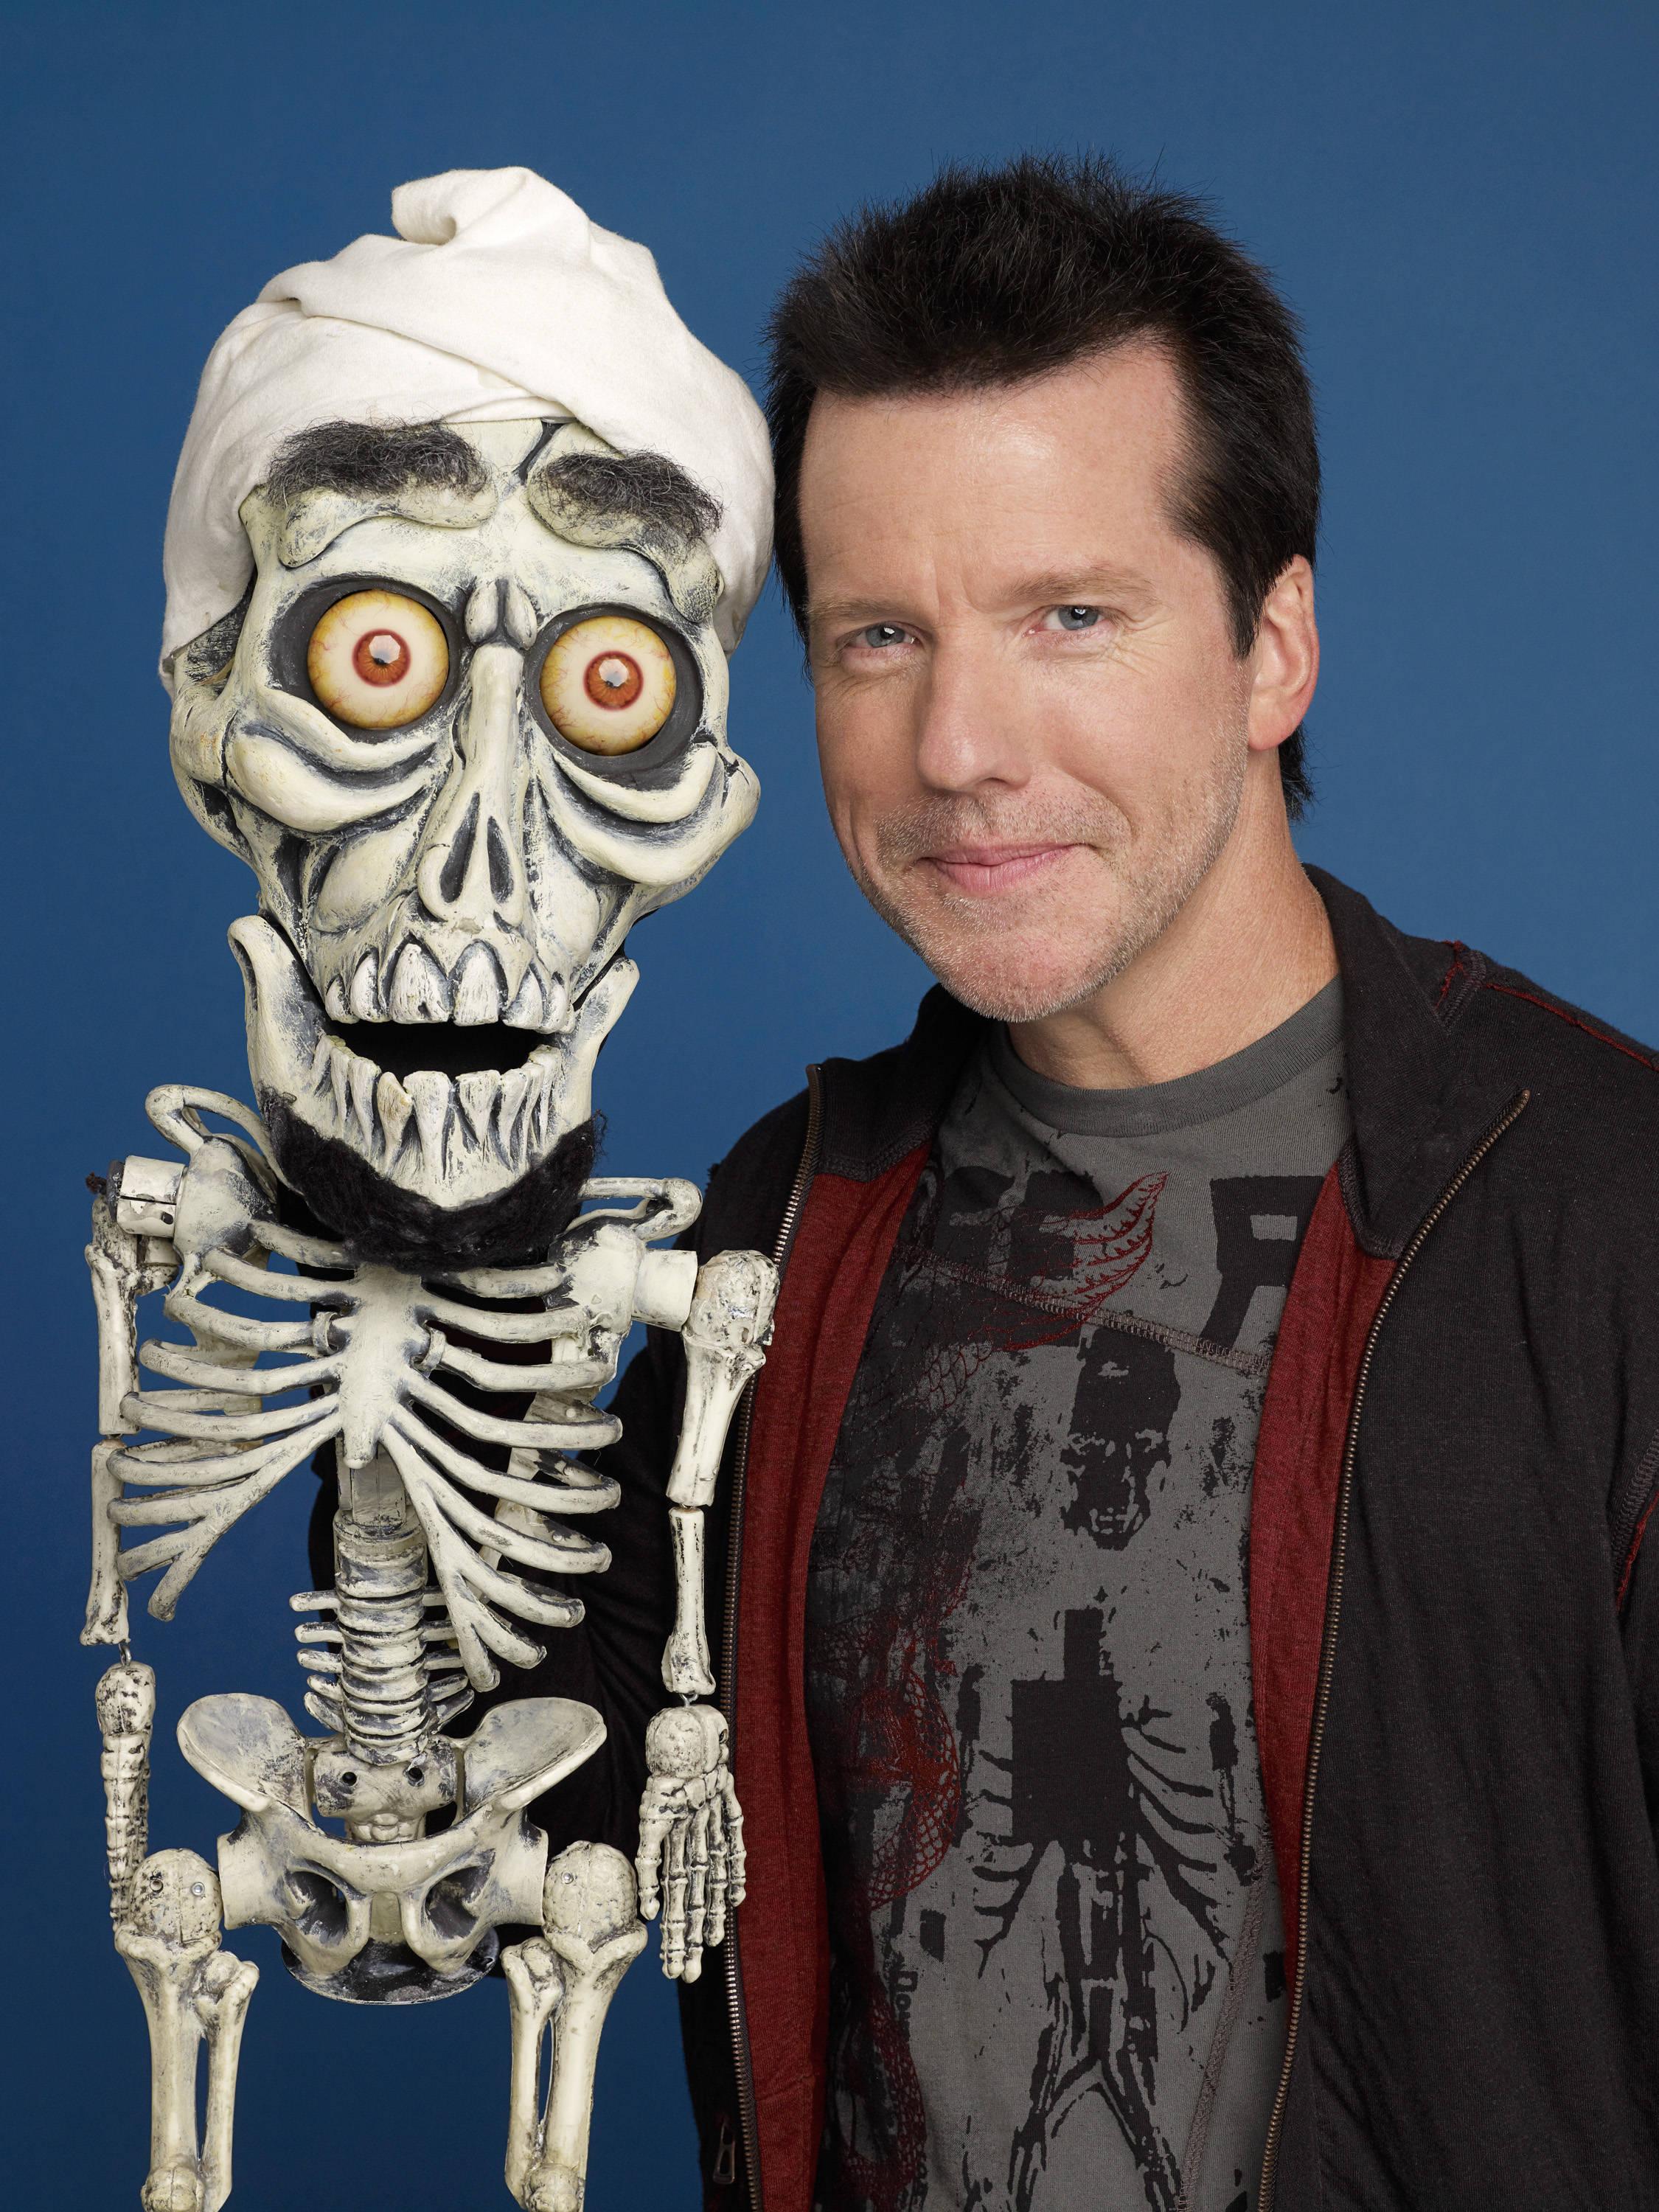 Jeff Dunham photos, pictures, stills, image, wallpapers, gallery.